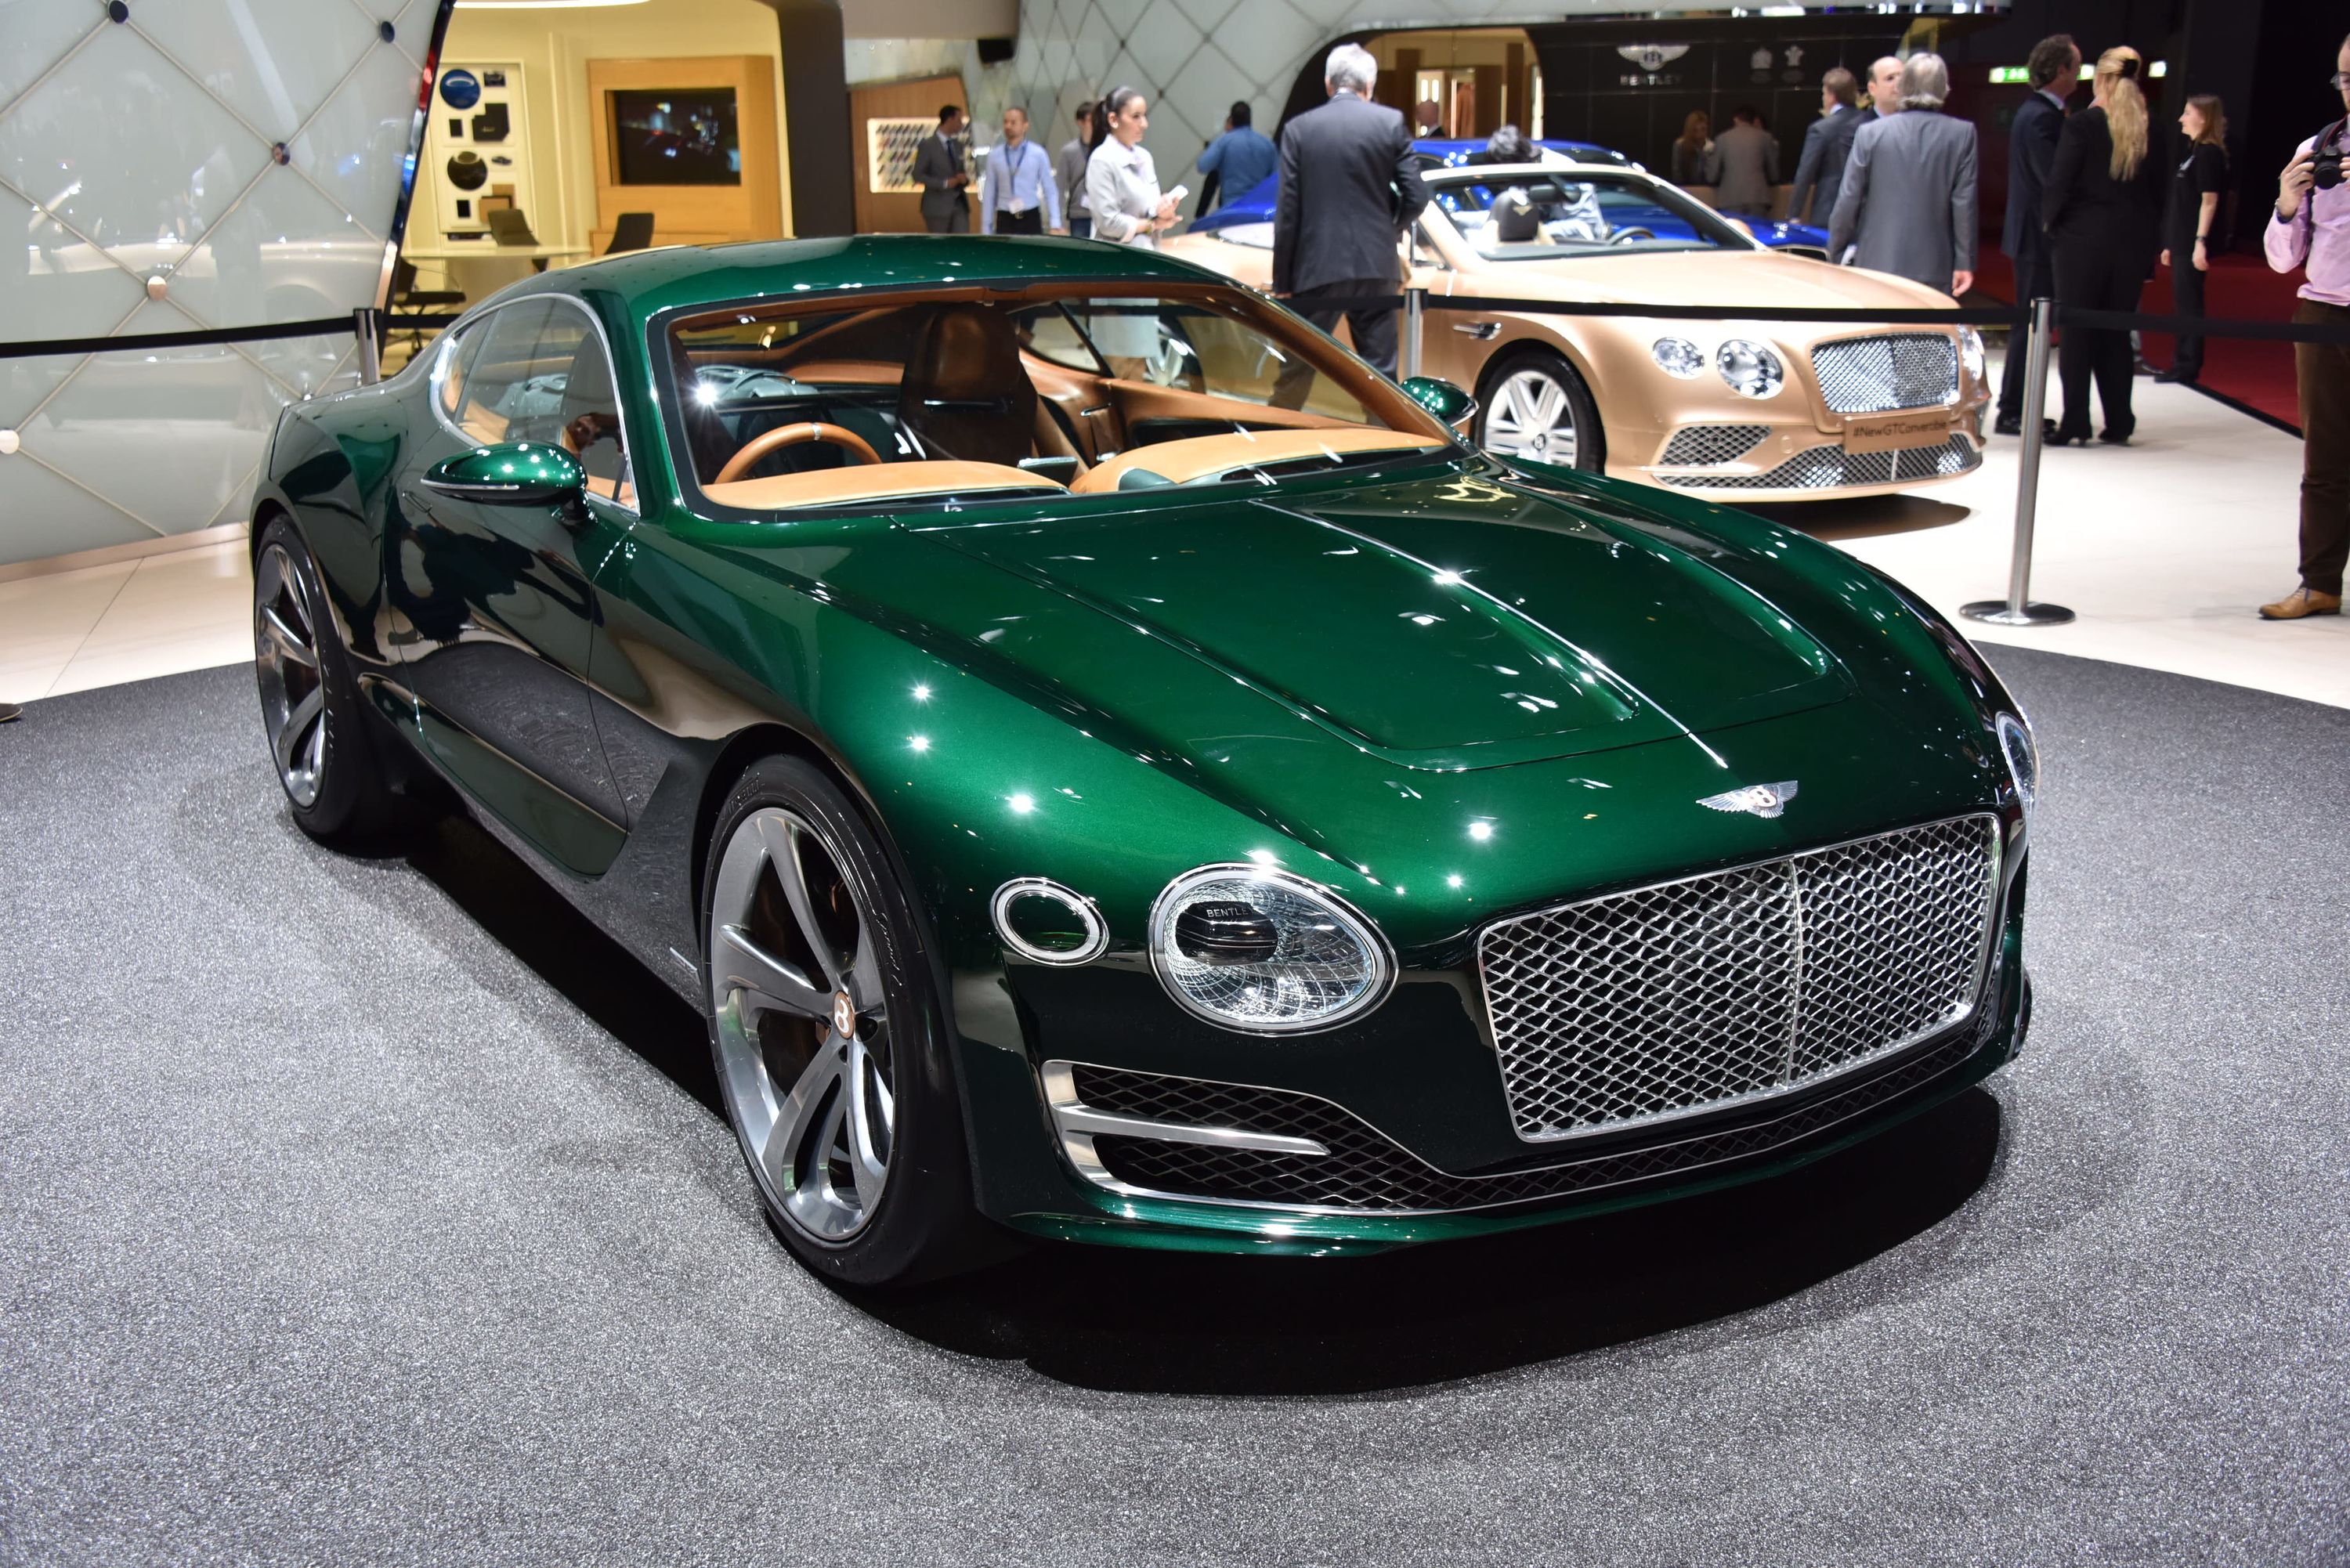 Bentley Exp 10 Speed 6 Concept A Glimpse Of What S To Come Arrives At The Geneva Motor Show